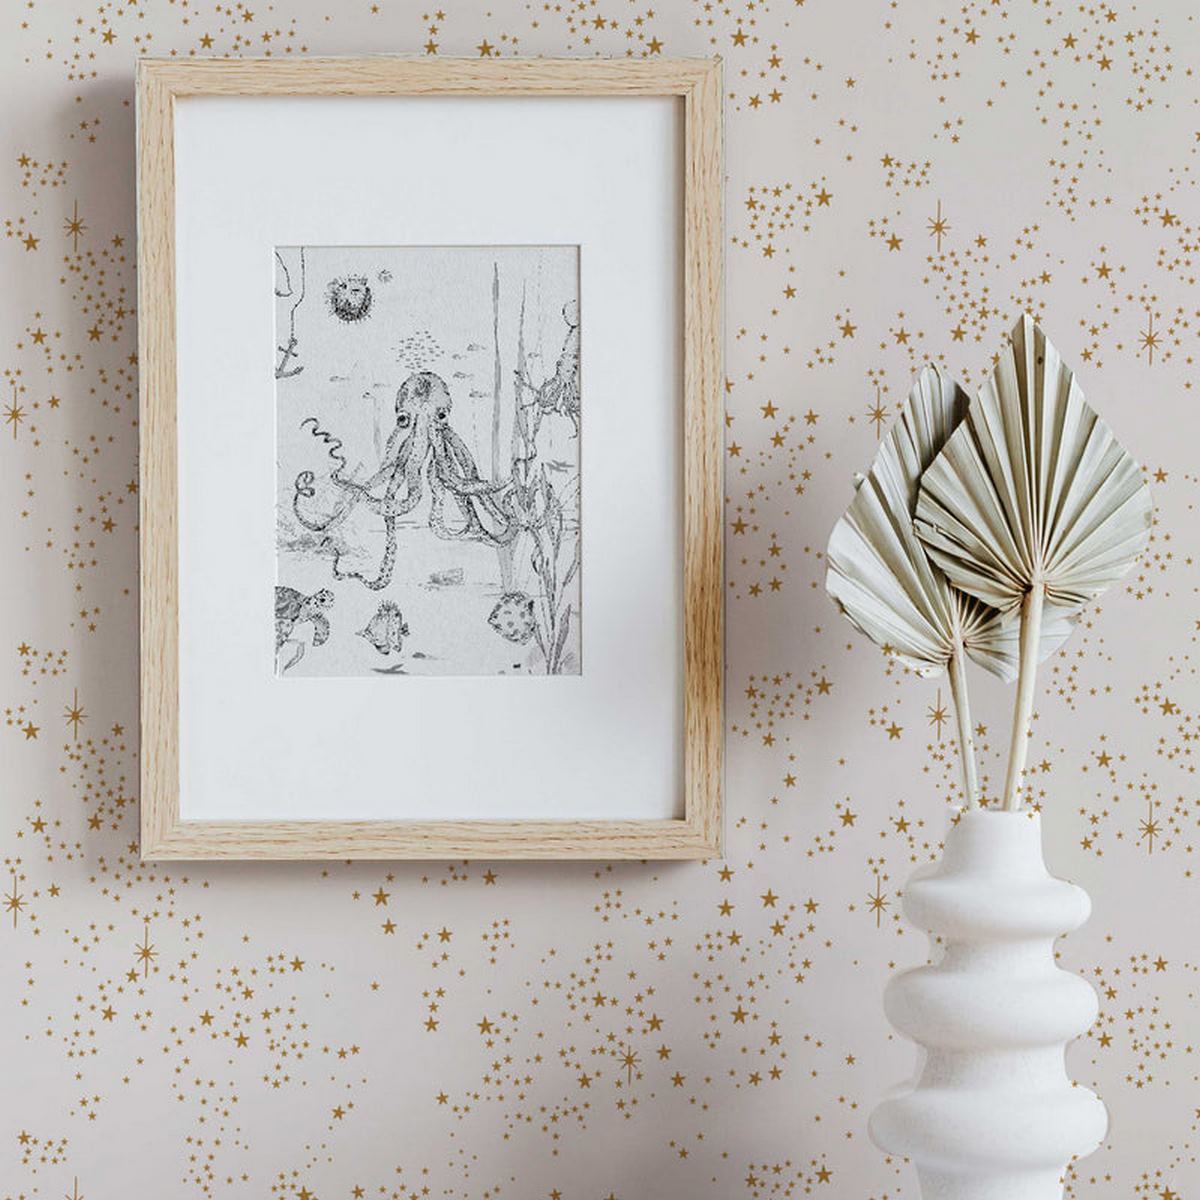 STARRY WALLPAPER - STARDUST OFF WHITE-GOLD